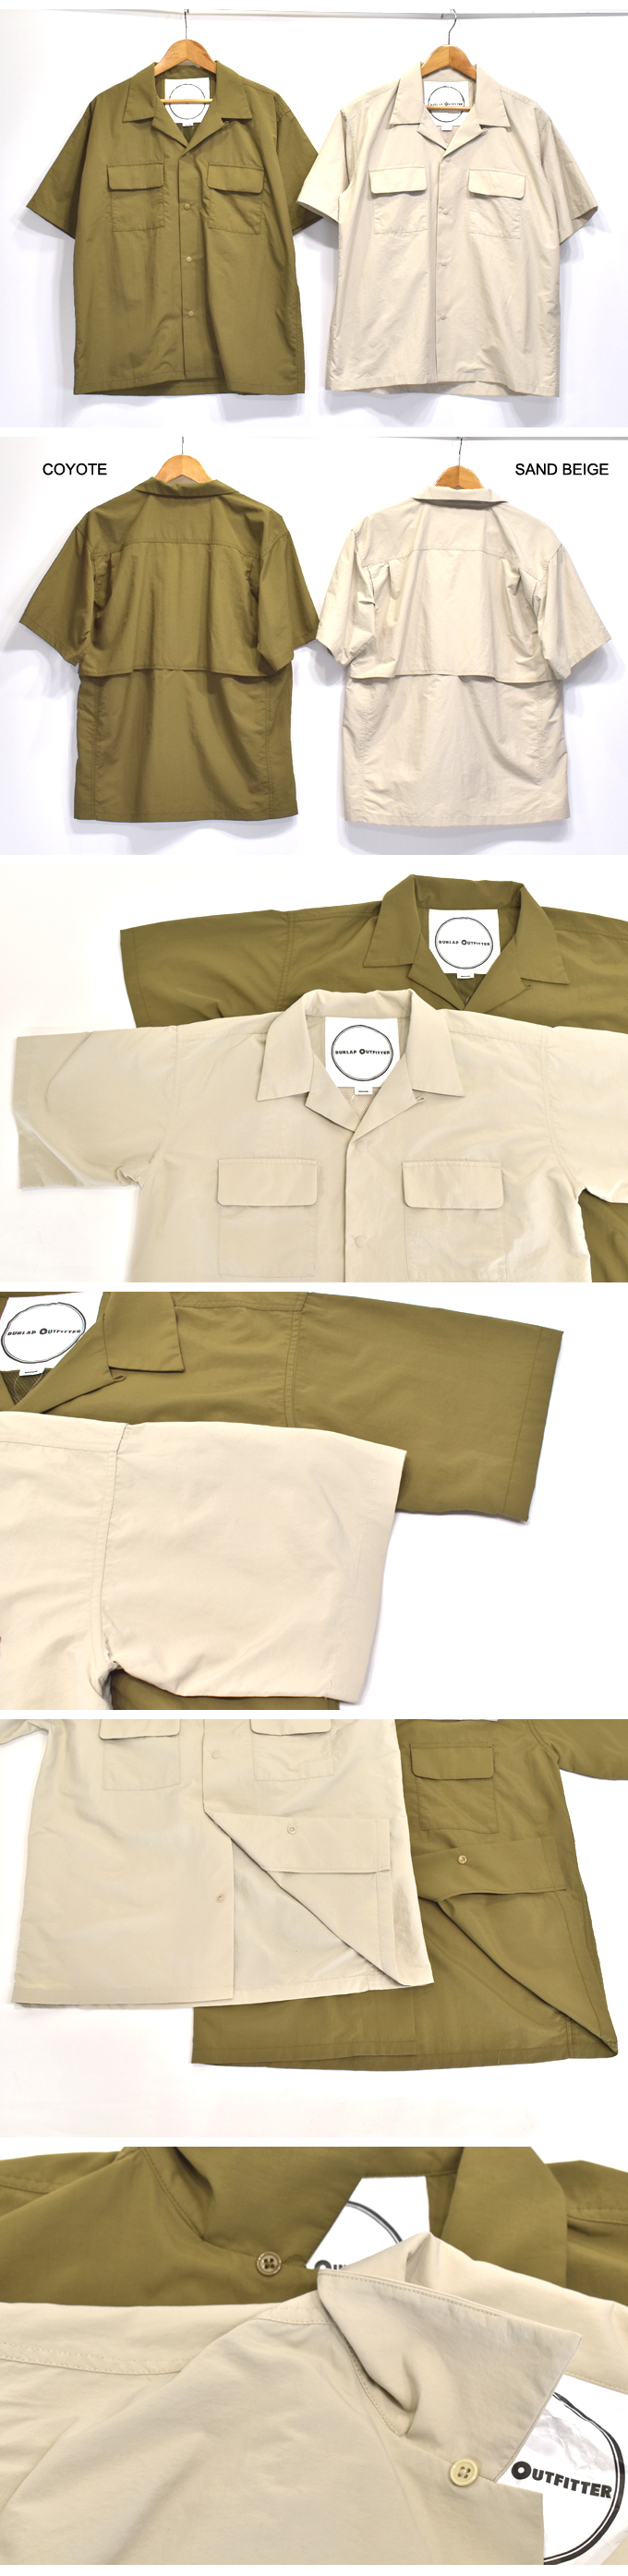 Burlap Outfitter S/S CAMP SHIRT SOLID